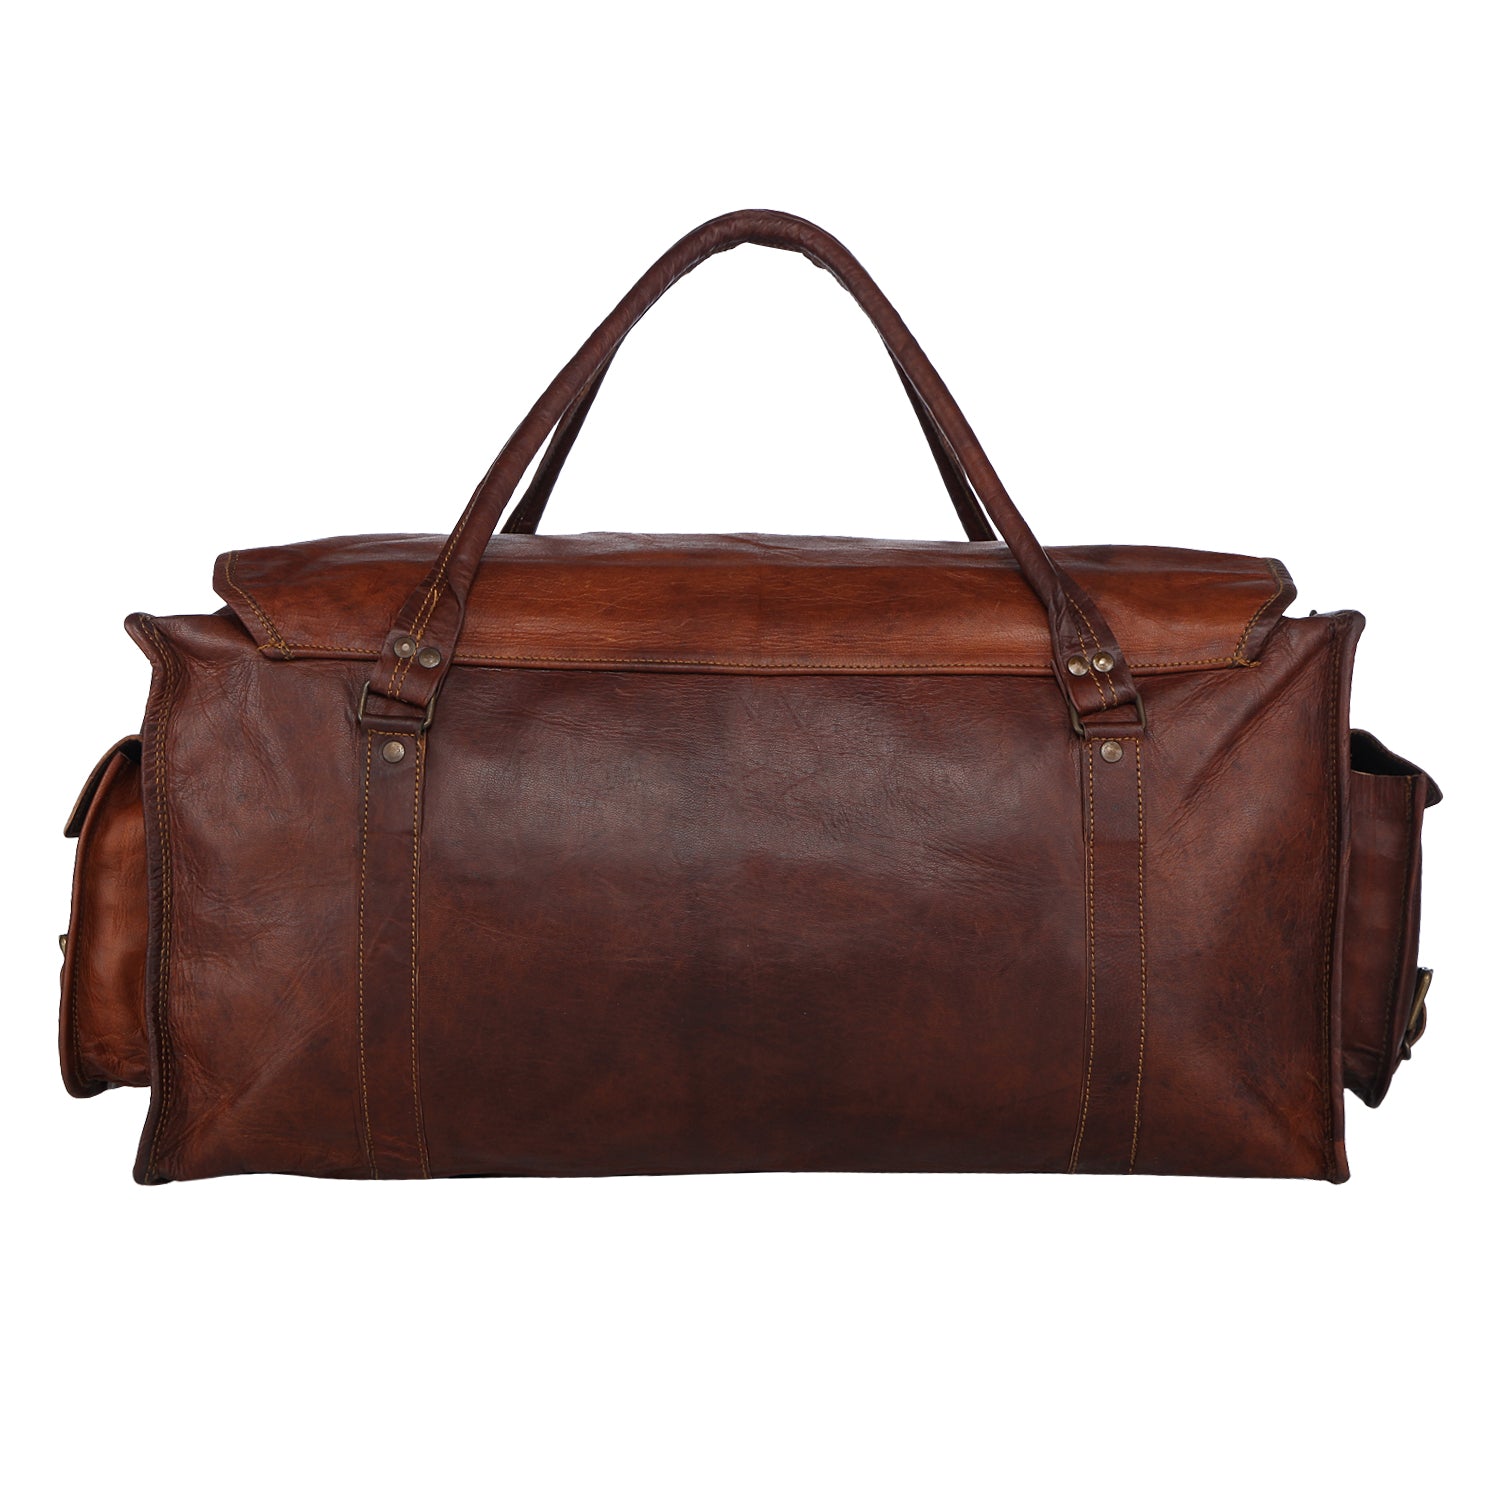 Buy Soft Leather Duffel Bags Piel Leather 9711 9712